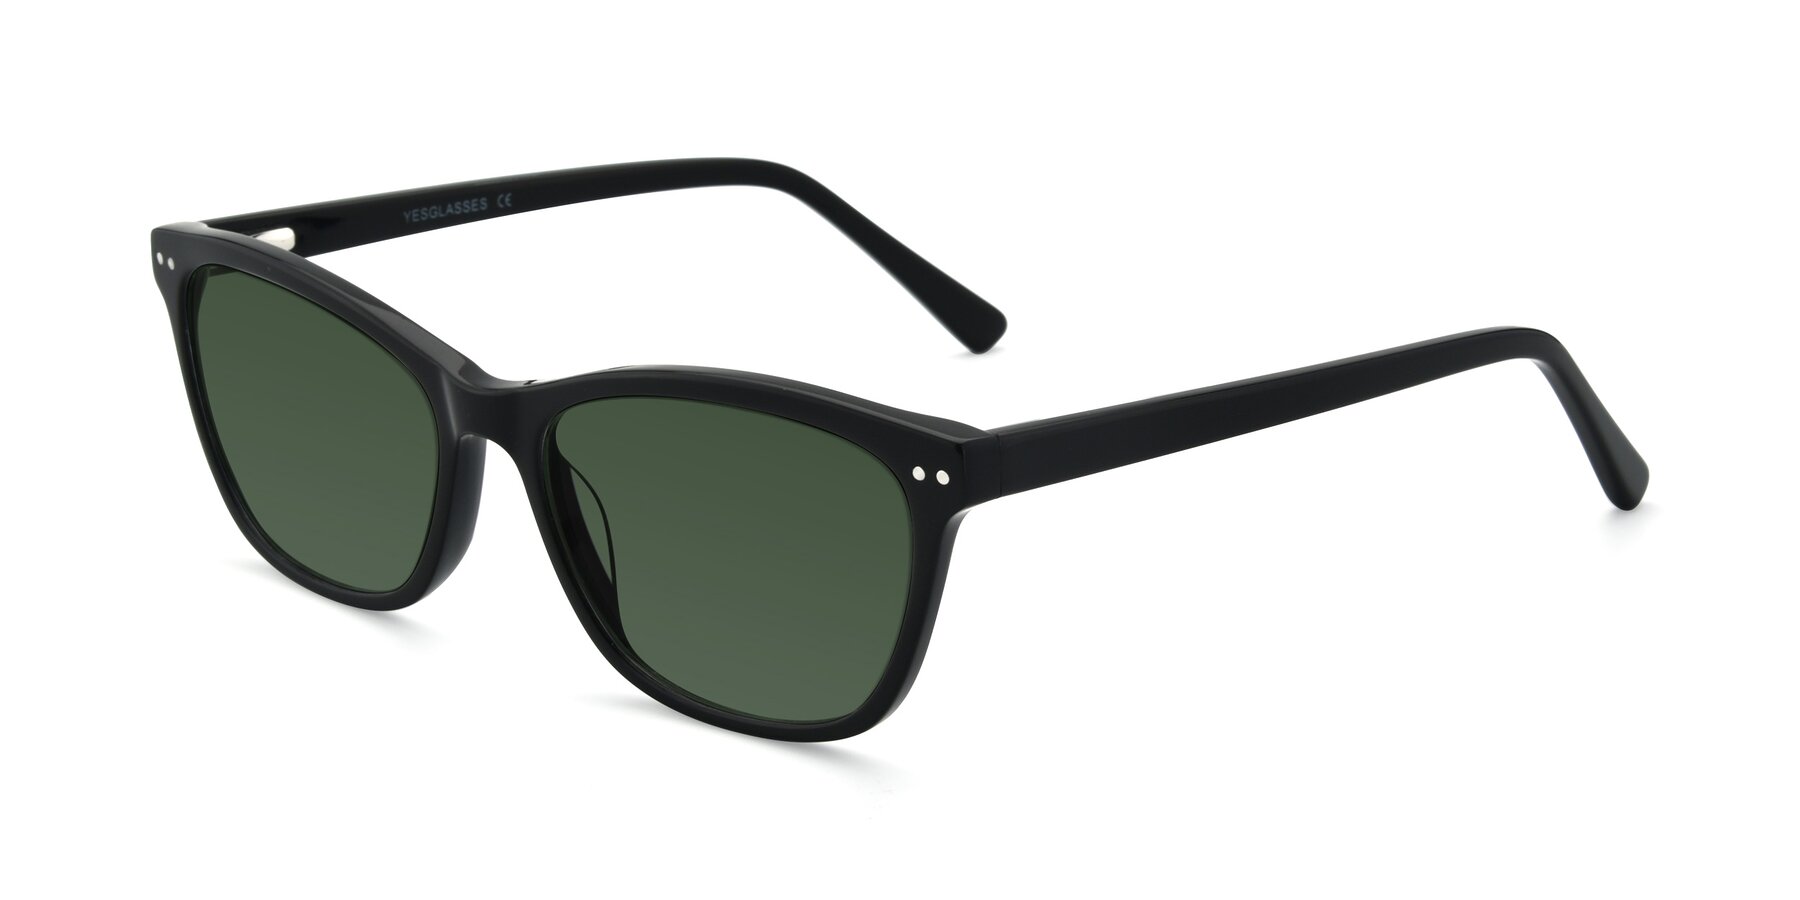 Angle of 17350 in Black with Green Tinted Lenses